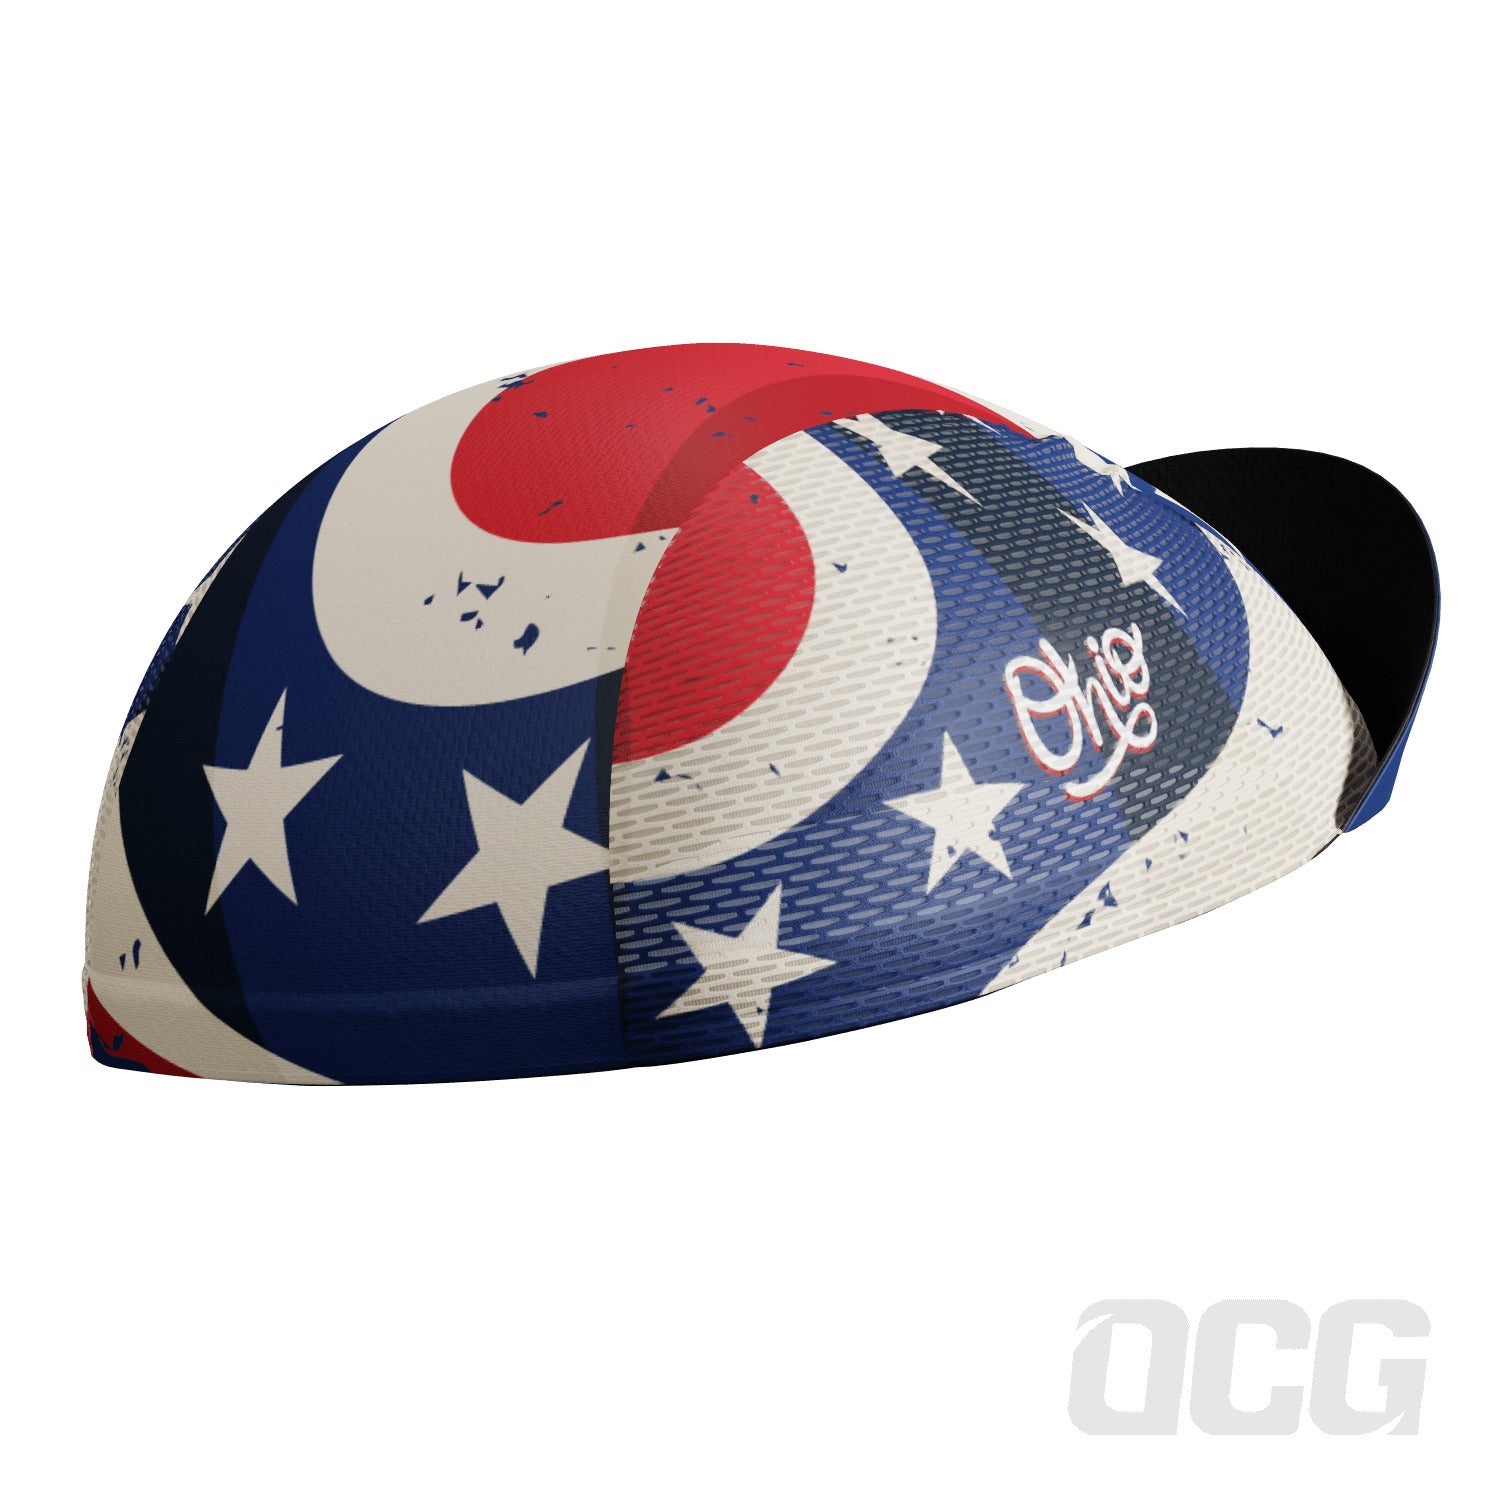 Men's Ohio Flag USA State Quick Dry Cycling Cap